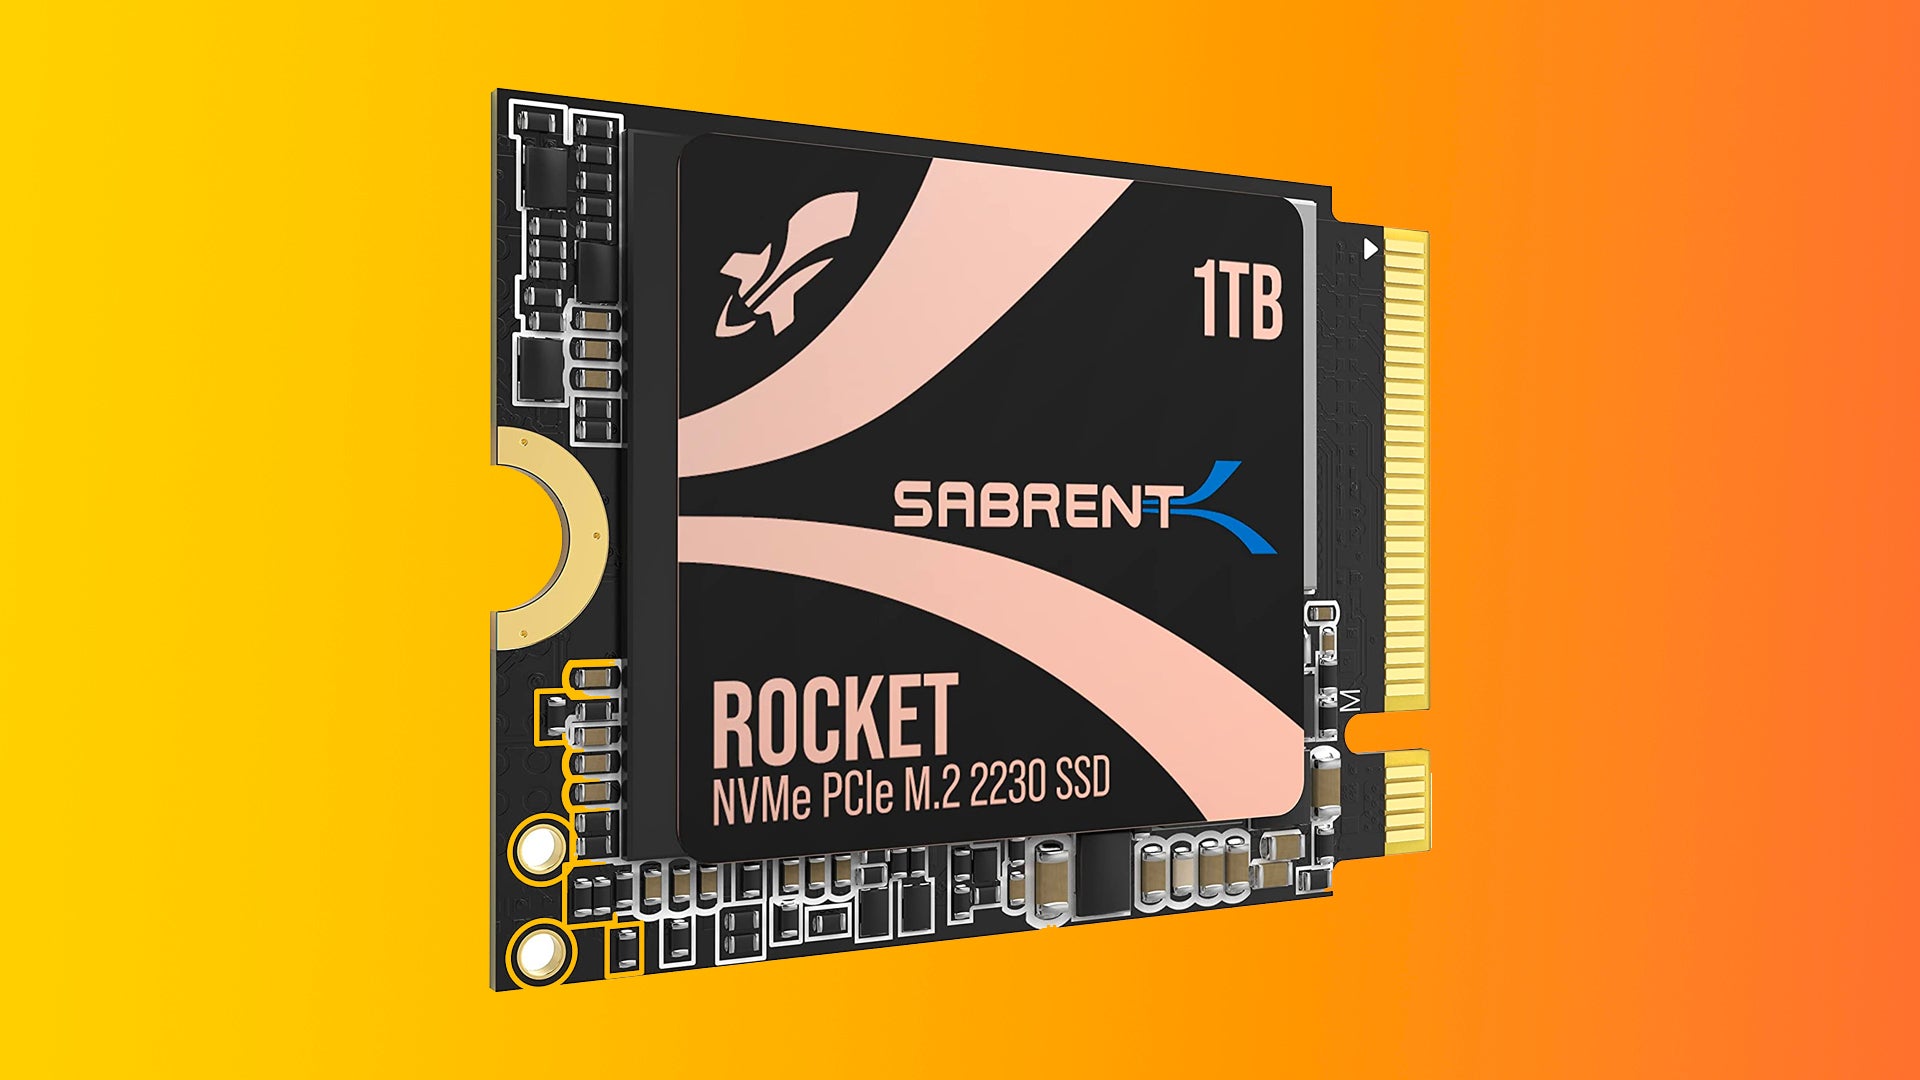 Upgrade your Steam Deck with this 1TB Sabrent SSD for £109/$103 